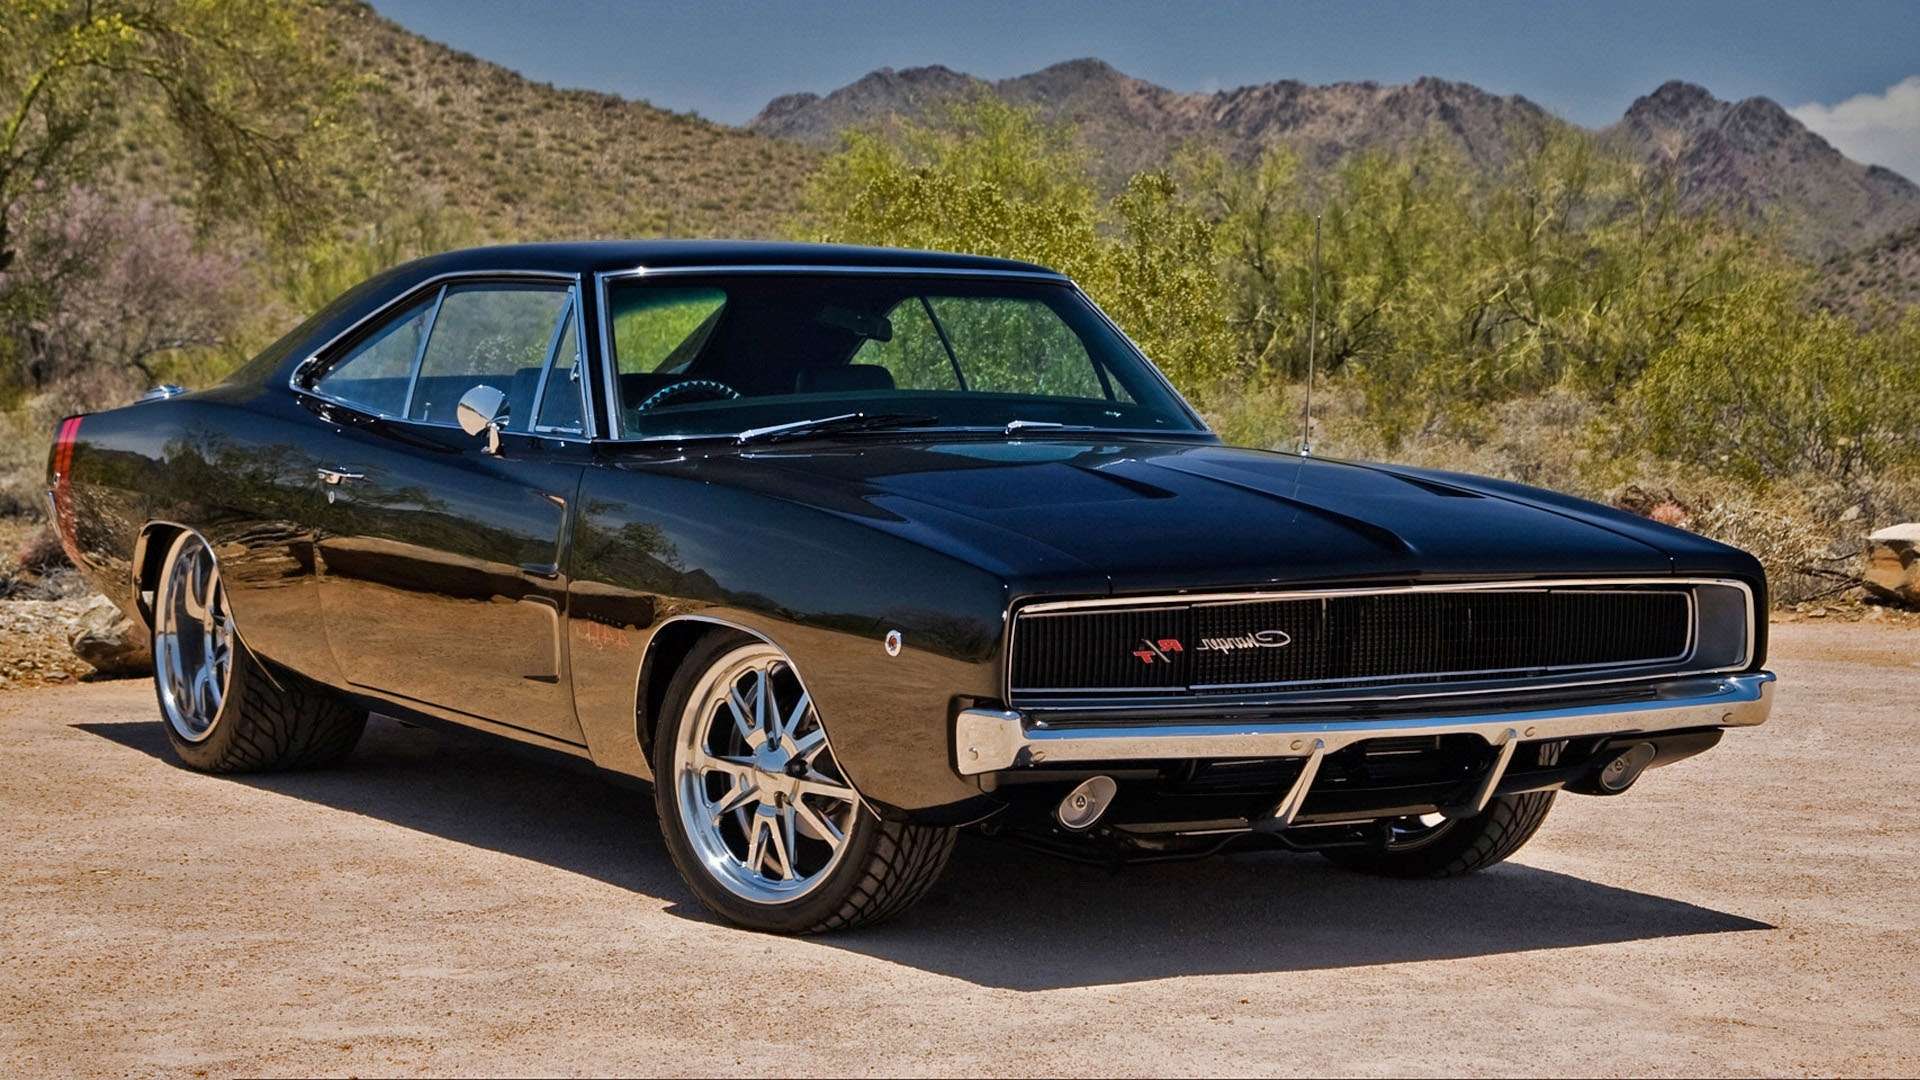 Car Wallpaper Dodge Charger Rt In High Quality